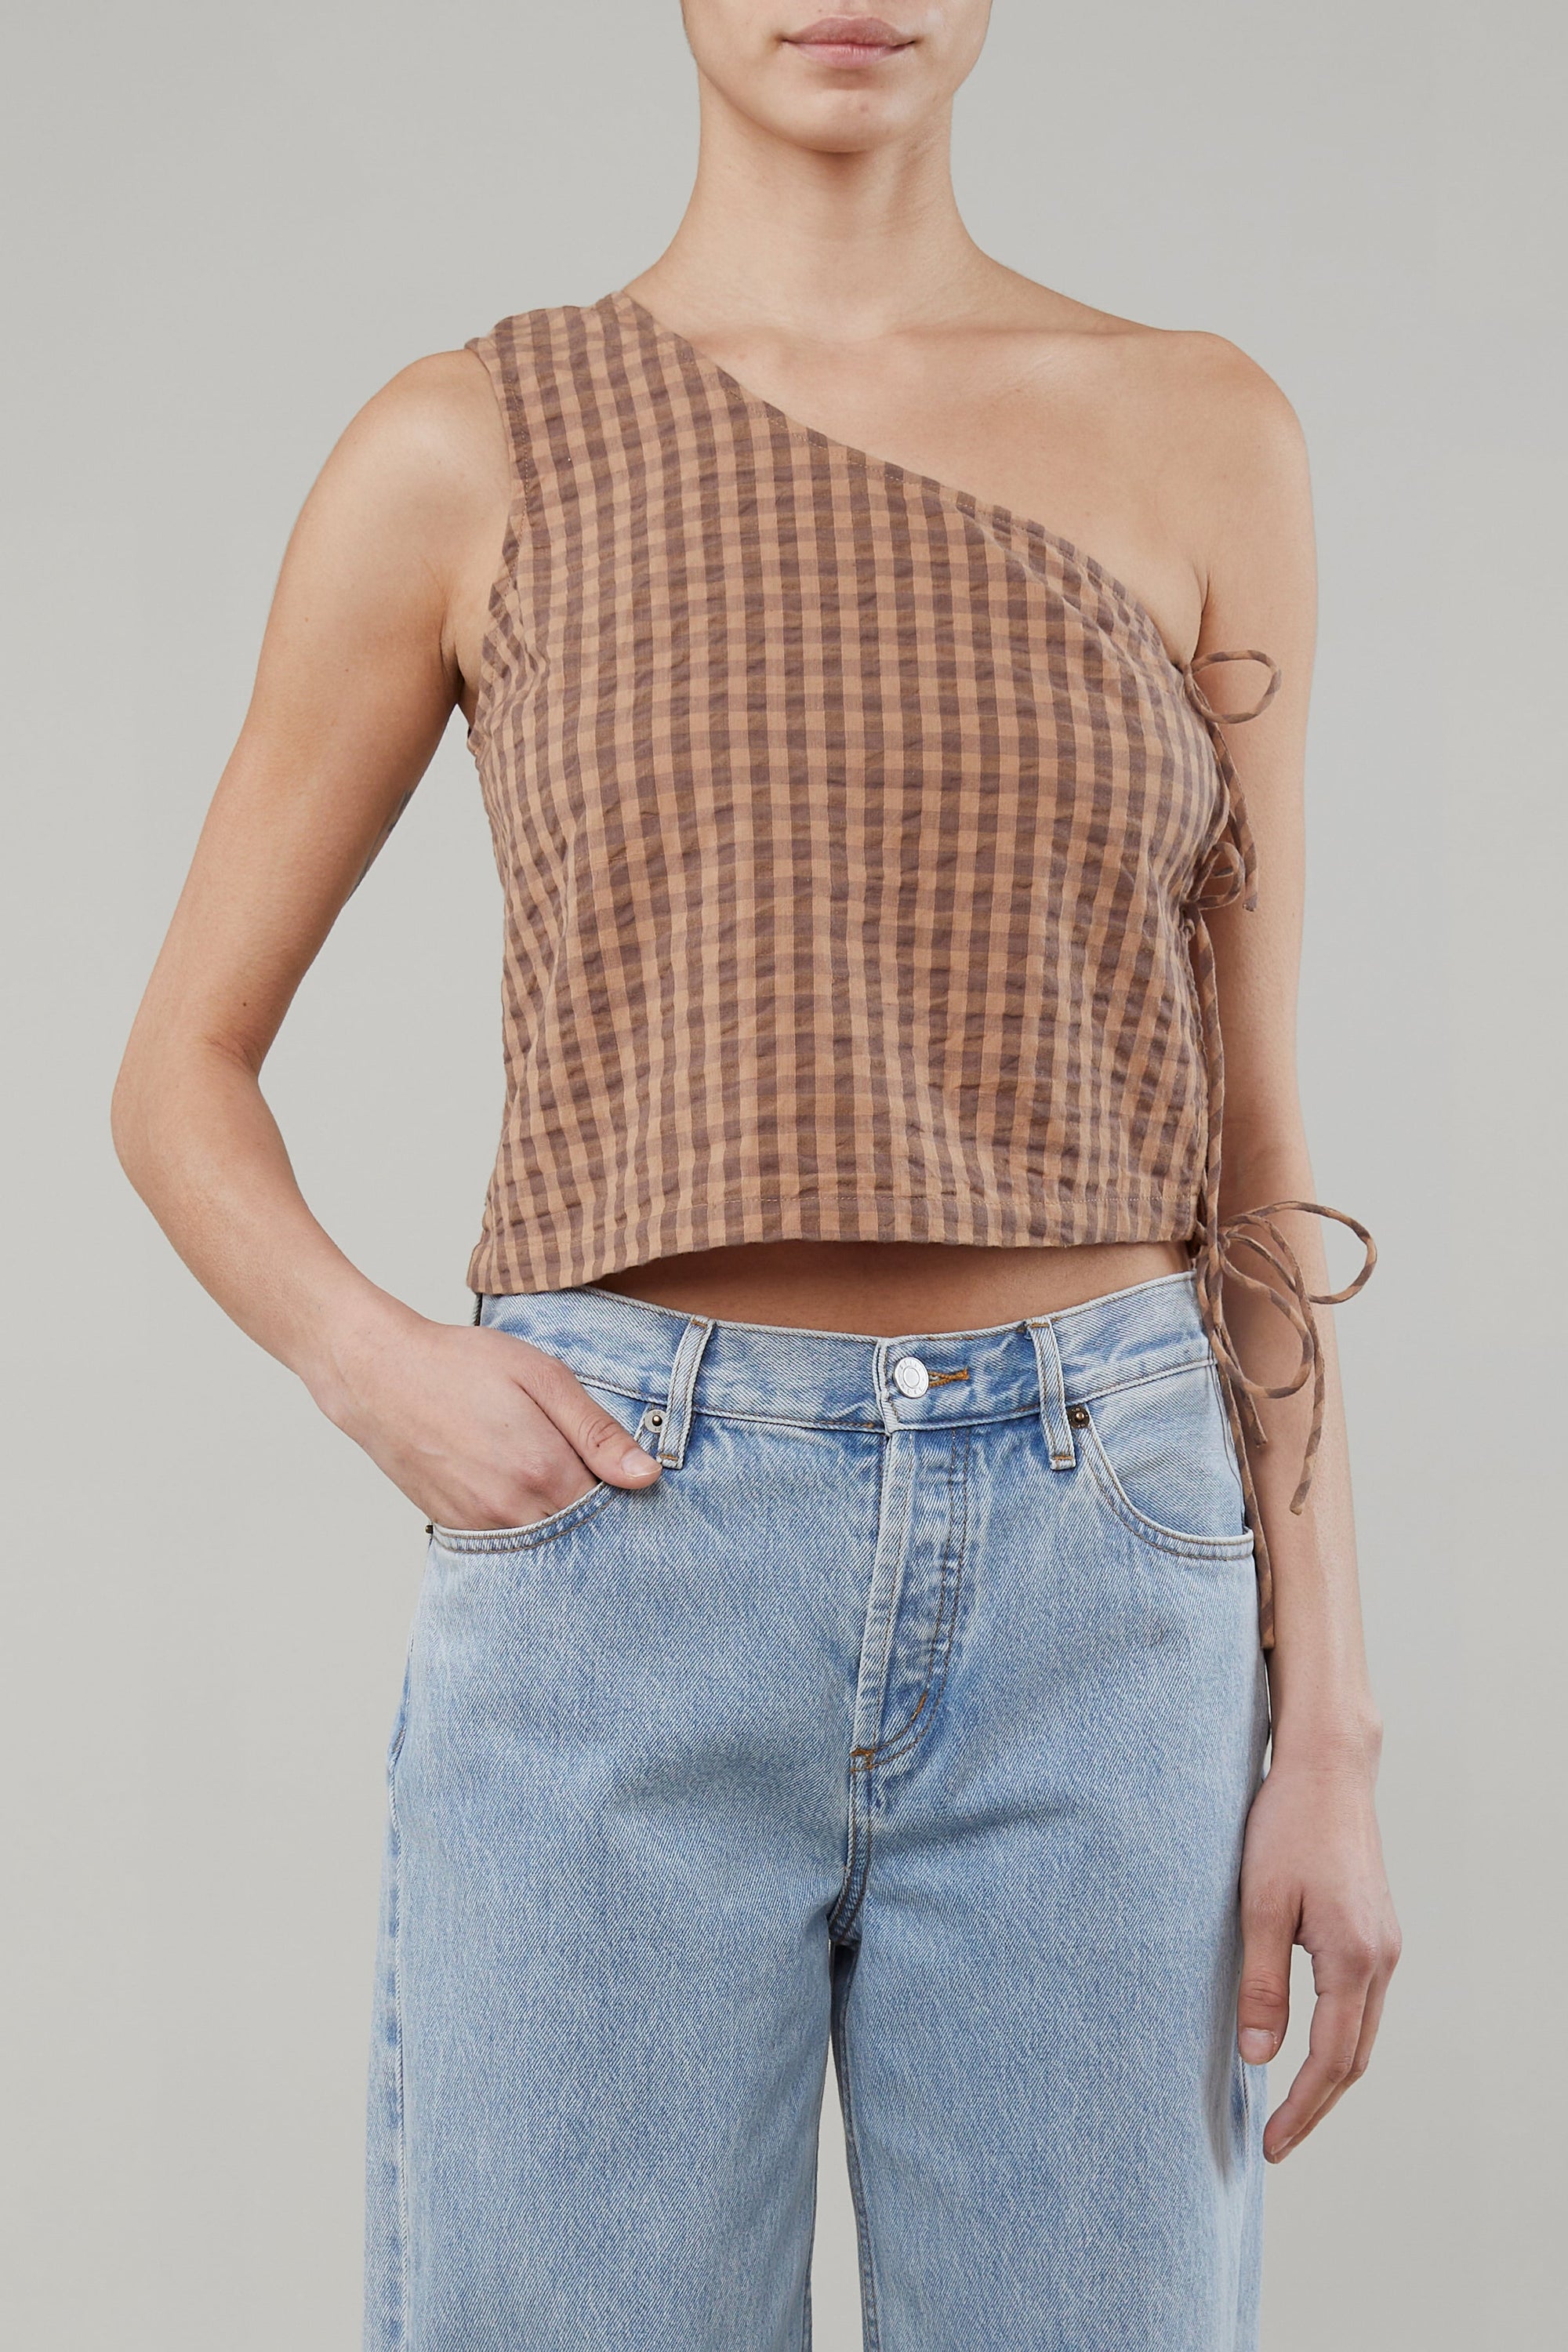 Still Here Amelia one shoulder pecan gingham top | PIPE AND ROW